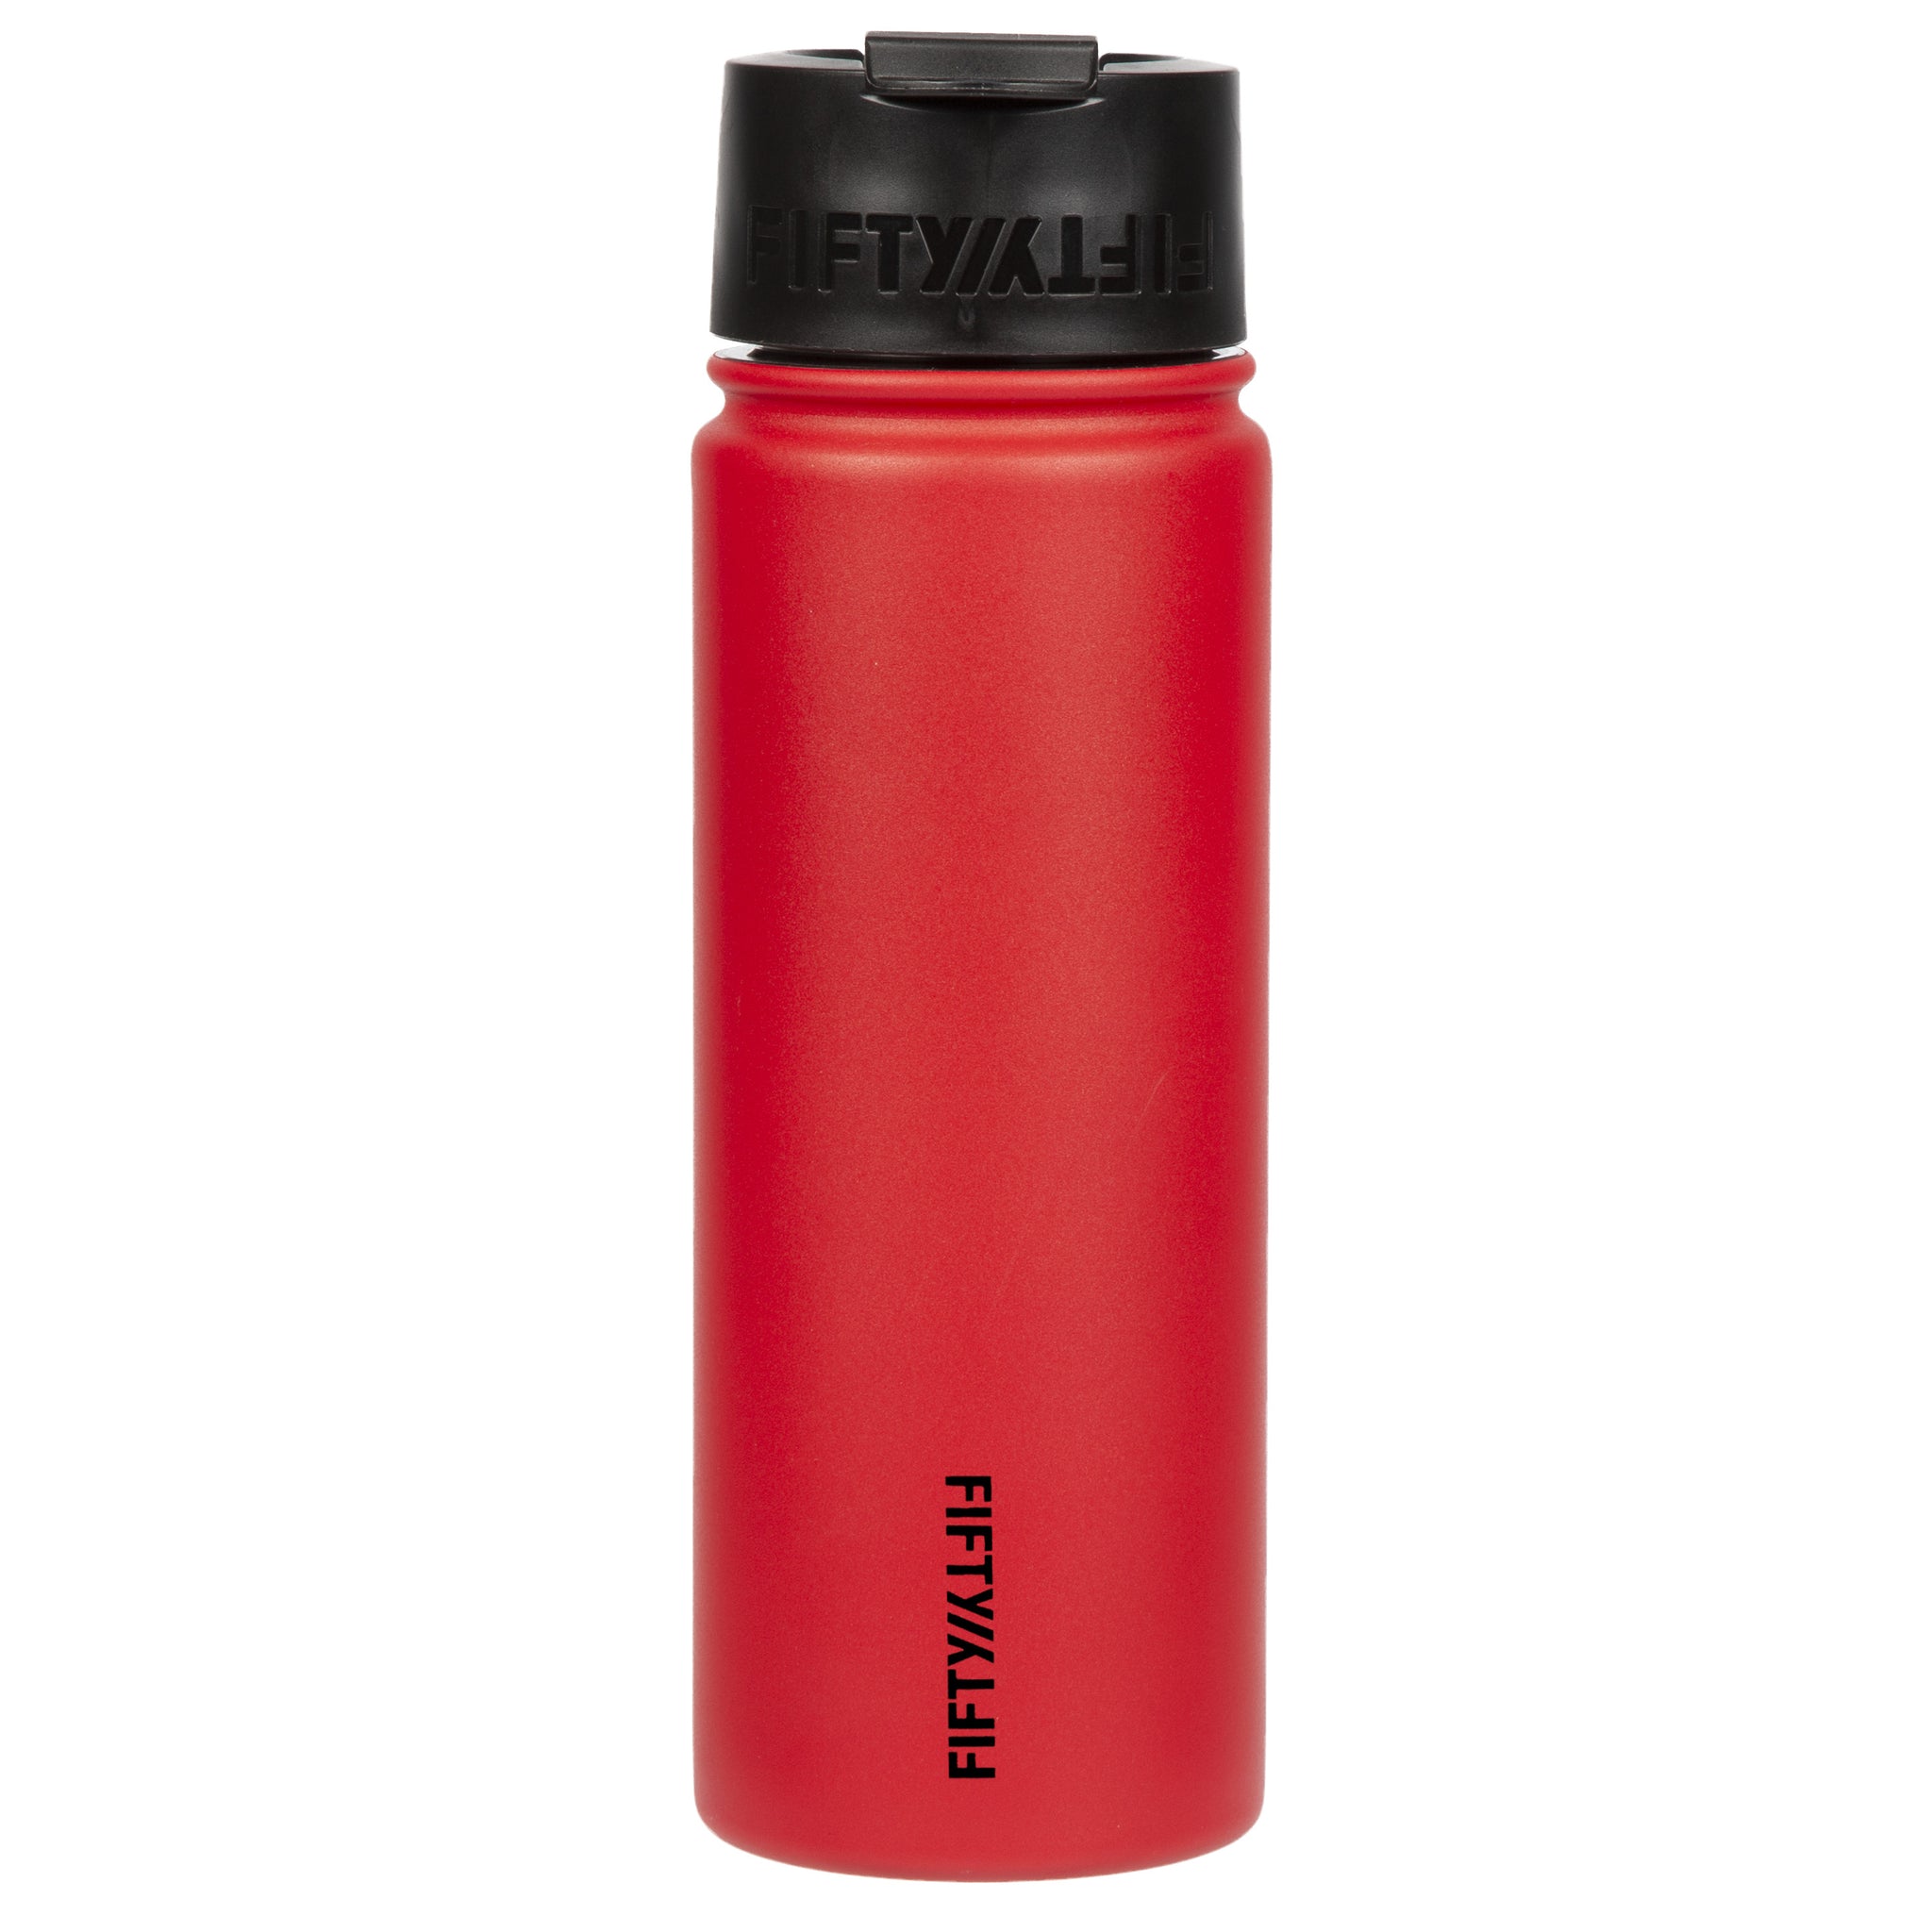 Just Me Personalized 20 oz. Water Bottle